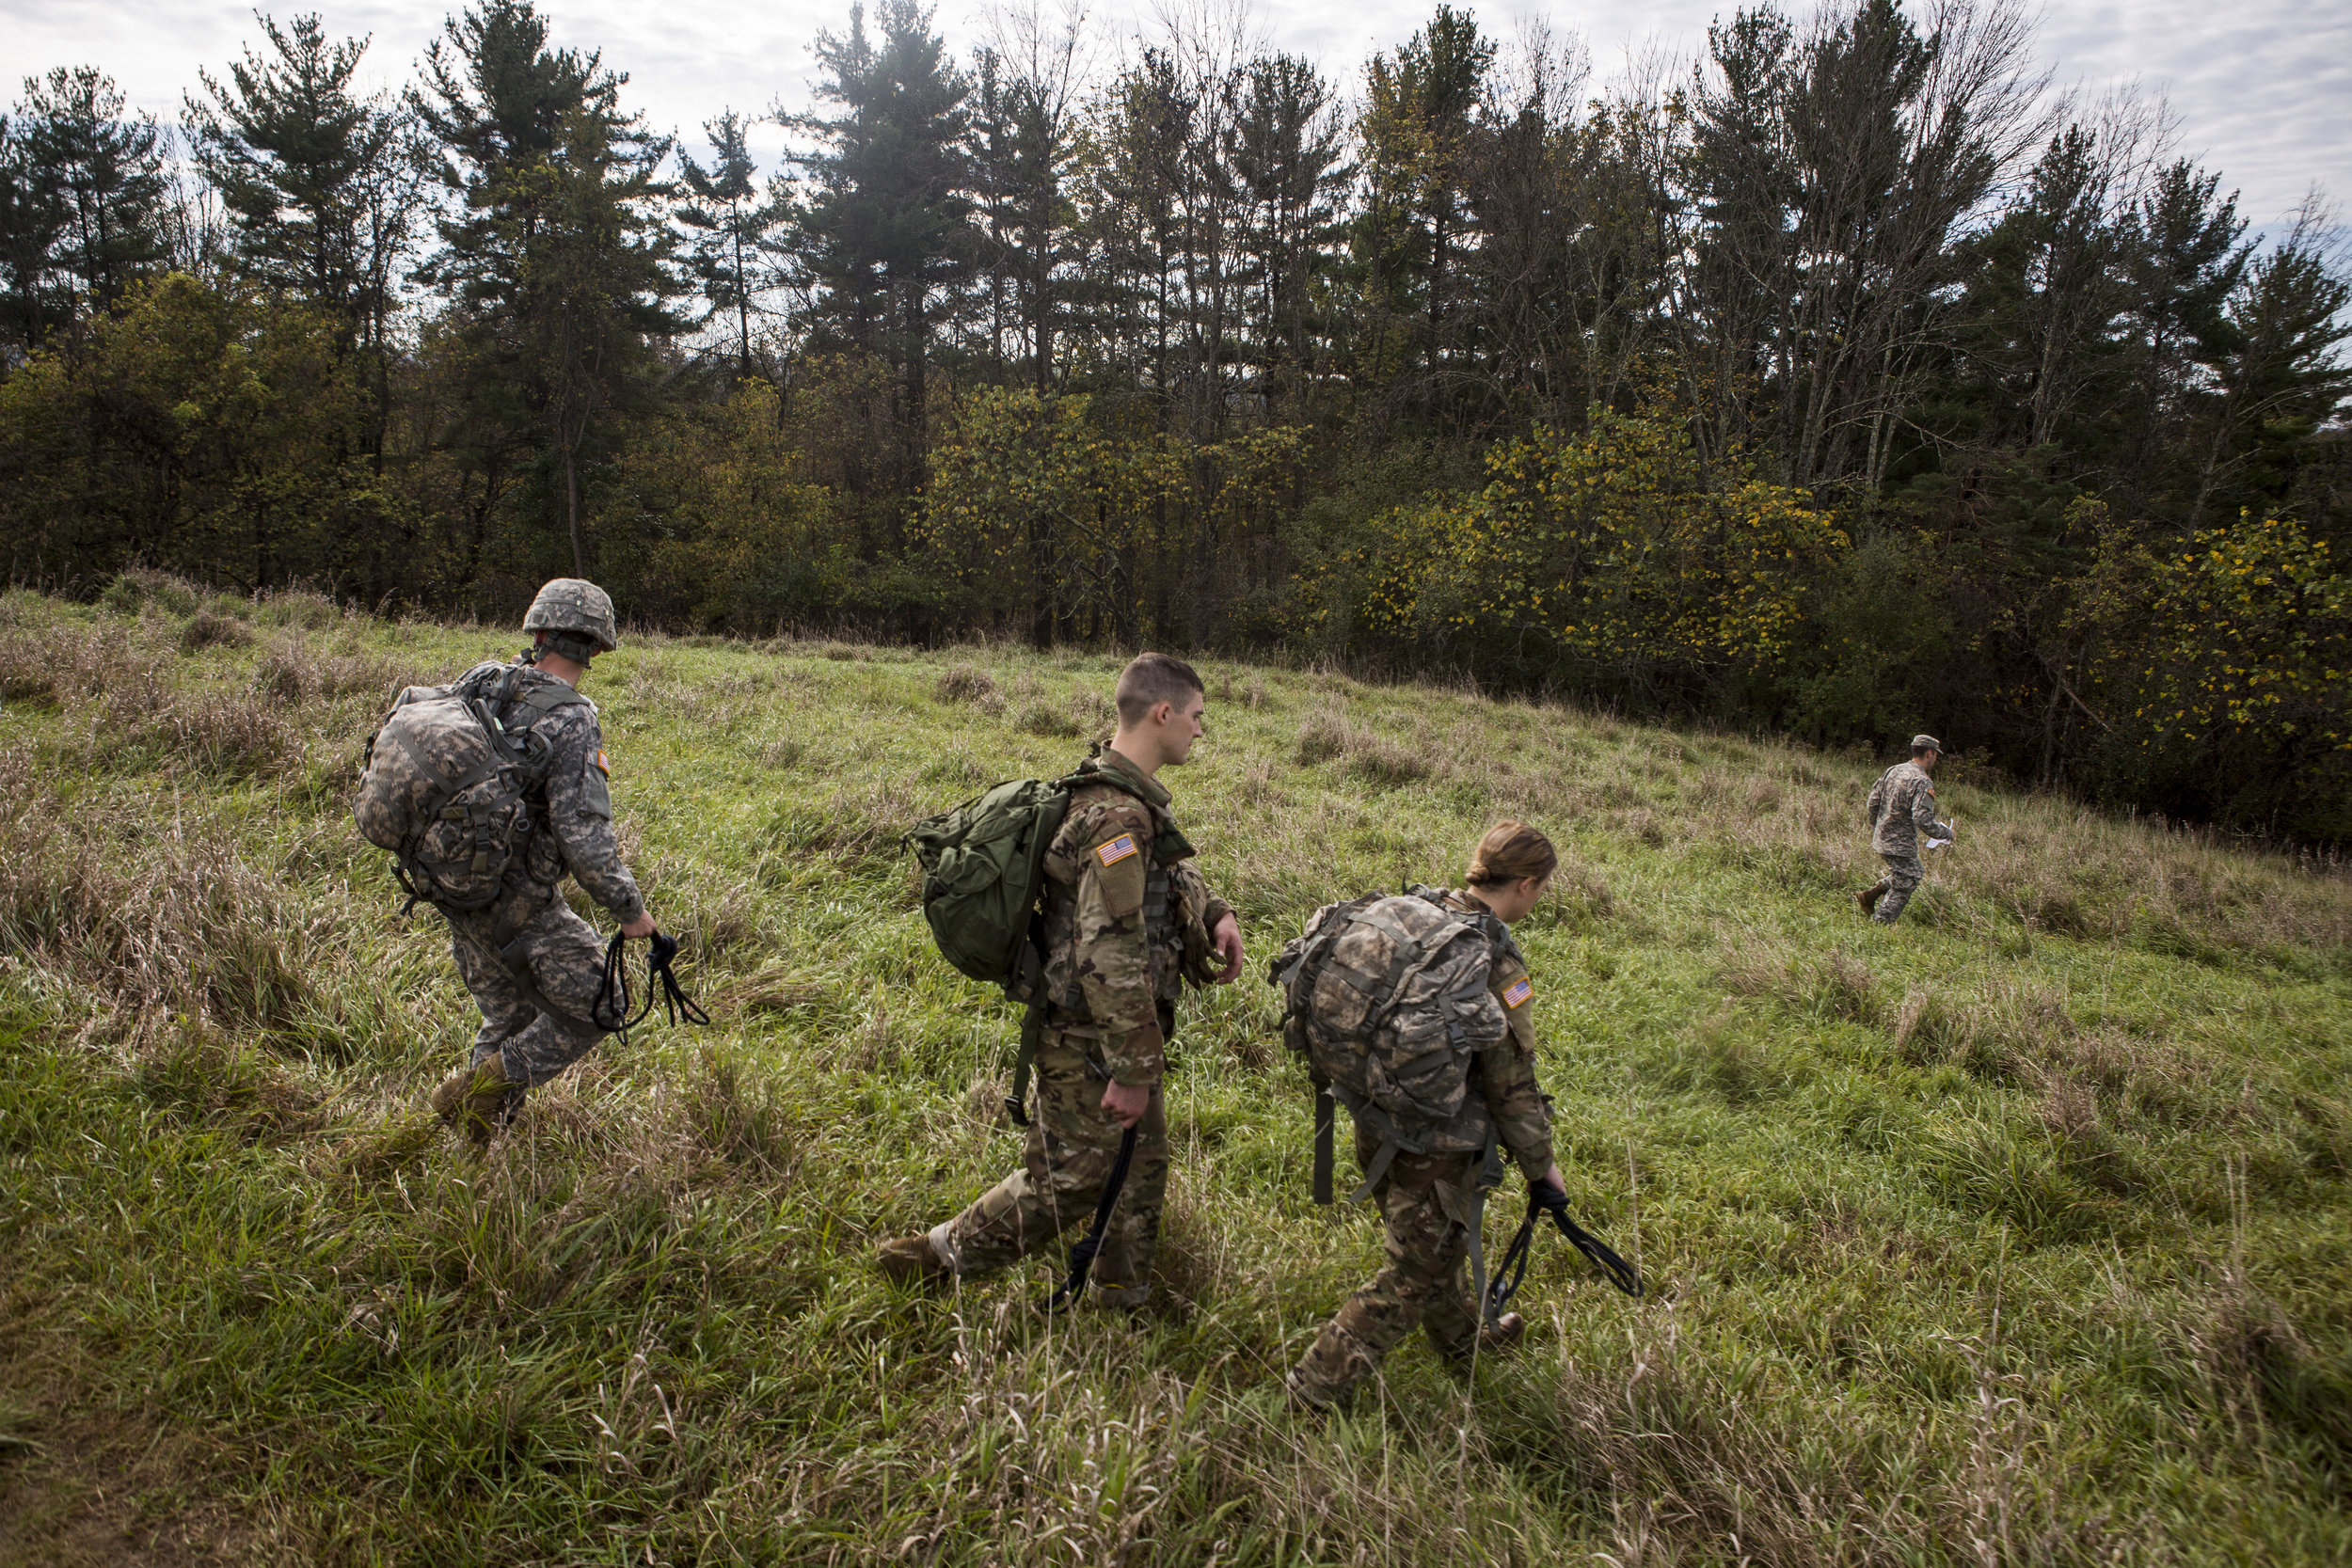  Simeon accompanies other ROTC cadets as they head toward the site of the rope bridge, a test of teamwork and technical skill. 